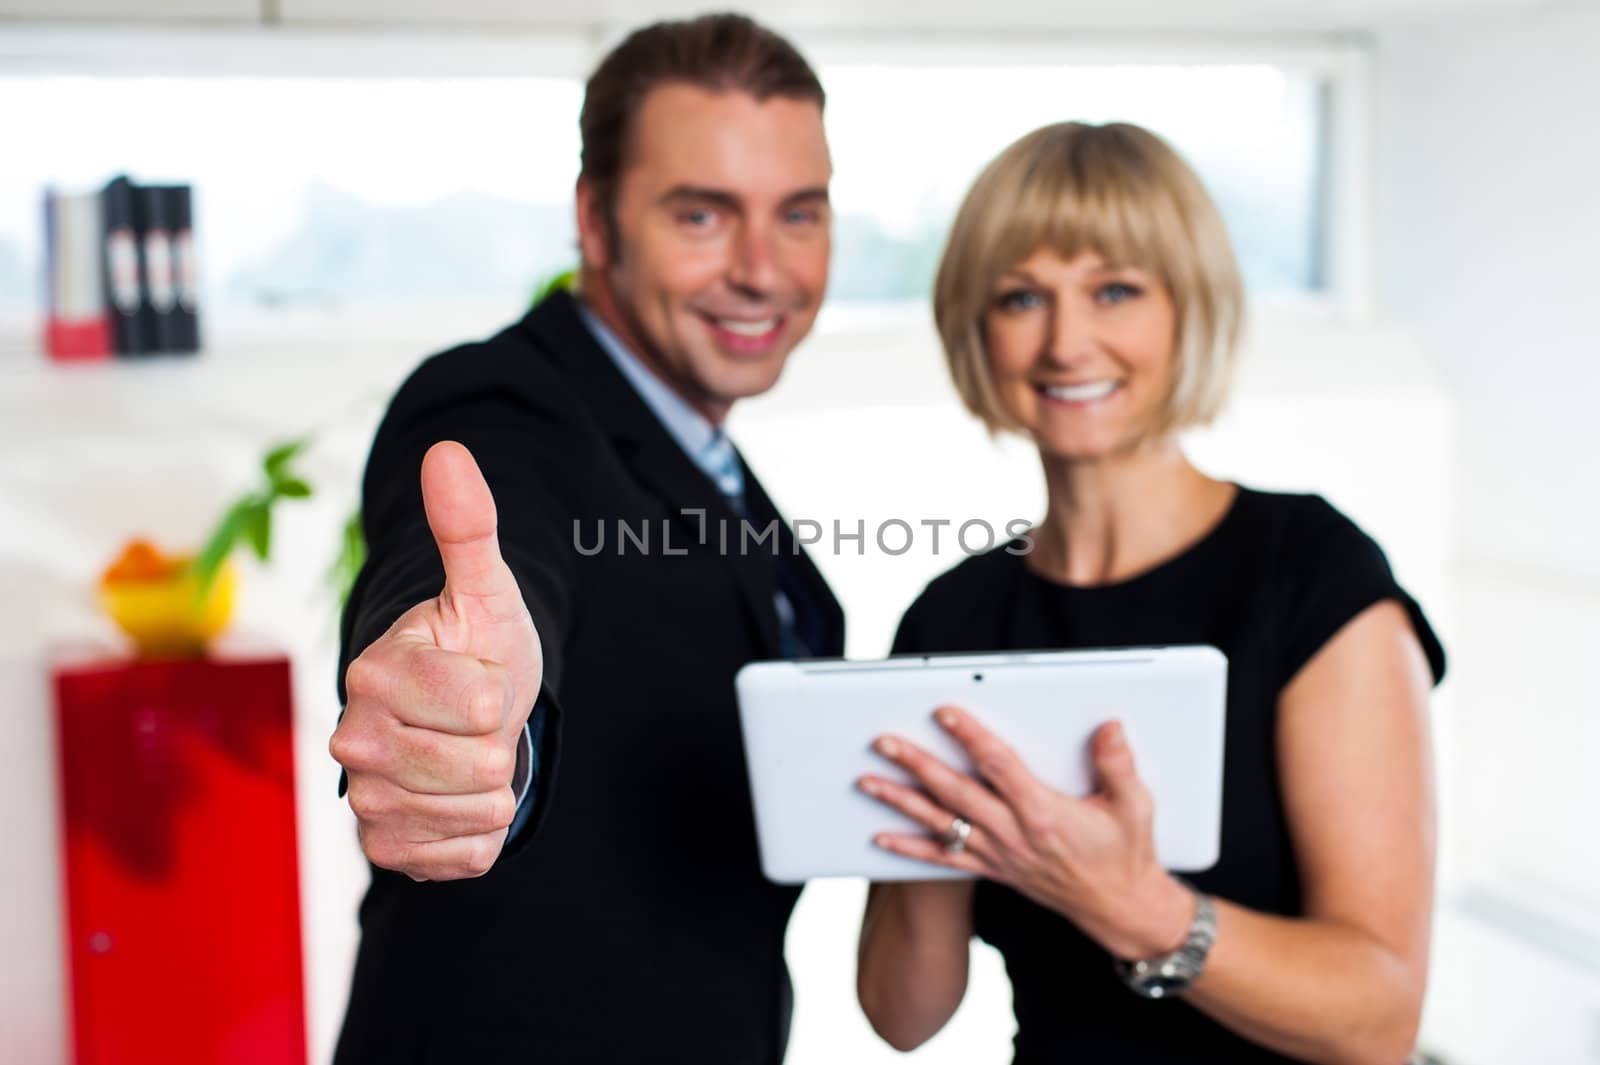 Secretary with a tablet posing with her successful boss by stockyimages